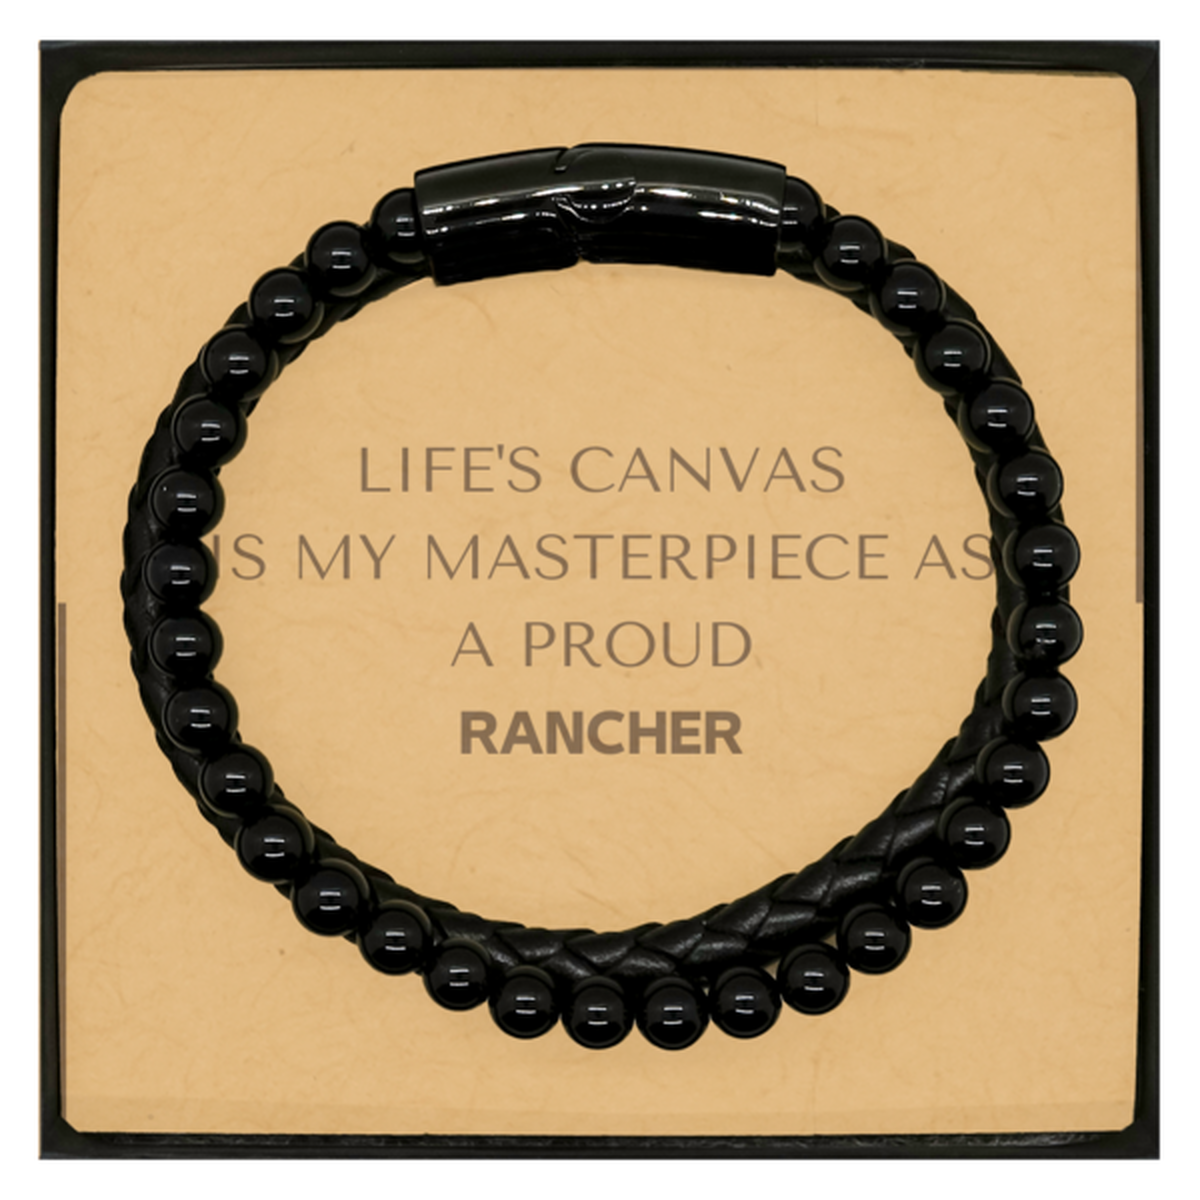 Proud Rancher Gifts, Life's canvas is my masterpiece, Epic Birthday Christmas Unique Stone Leather Bracelets For Rancher, Coworkers, Men, Women, Friends